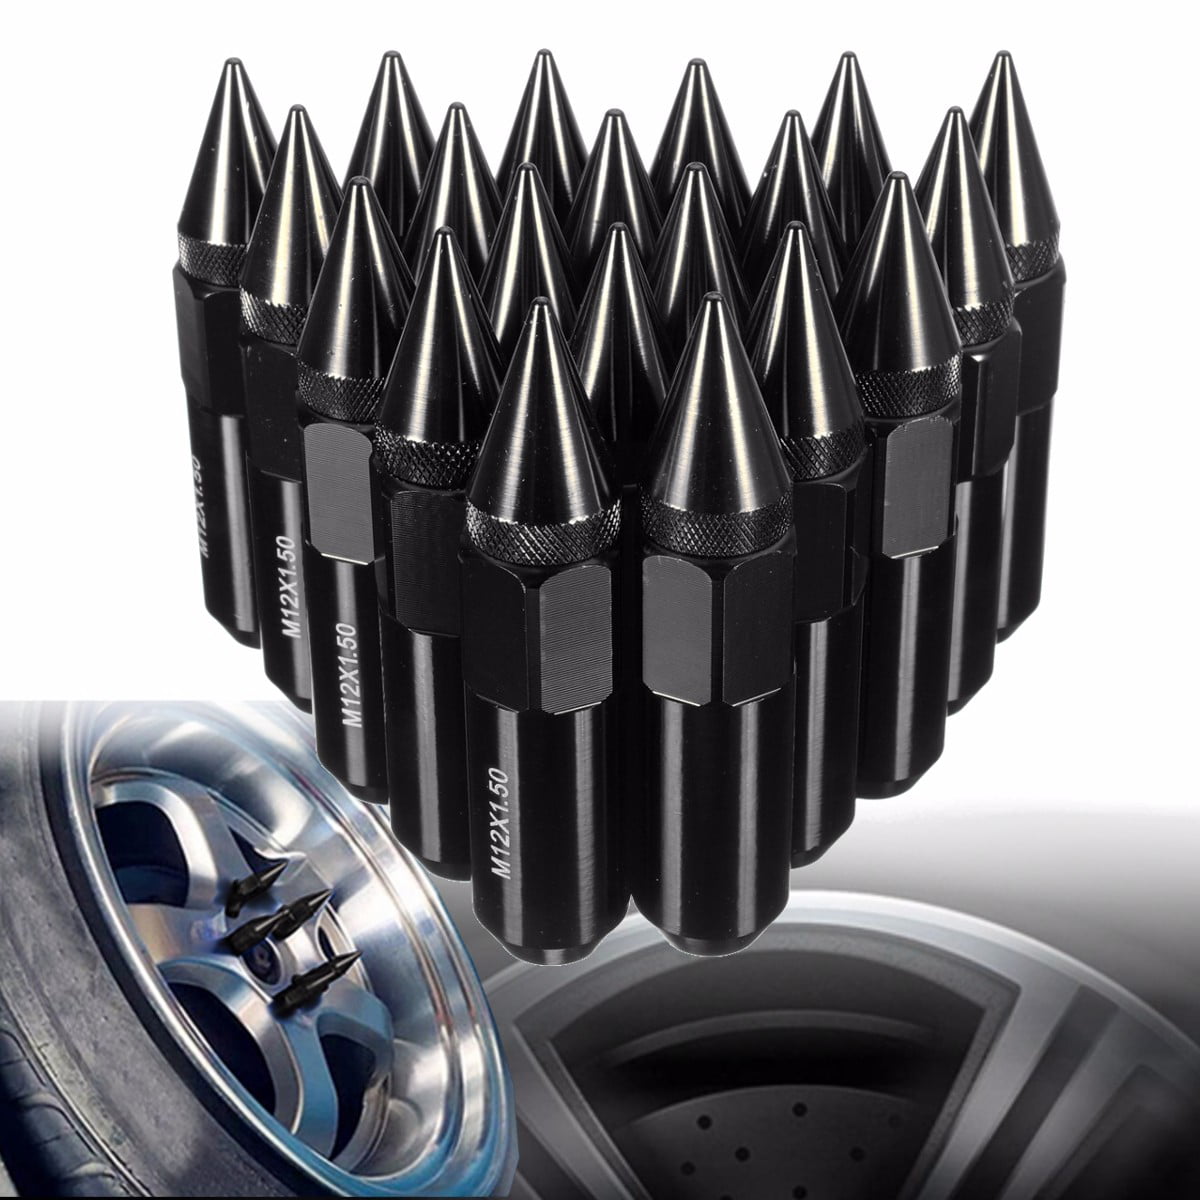 Multicolor ECCPP Replacement for Wheel Lug Nuts M12X1.5 Cap Spiked Extended Tuner 60mm Aluminum Lug Nut 20pcs 